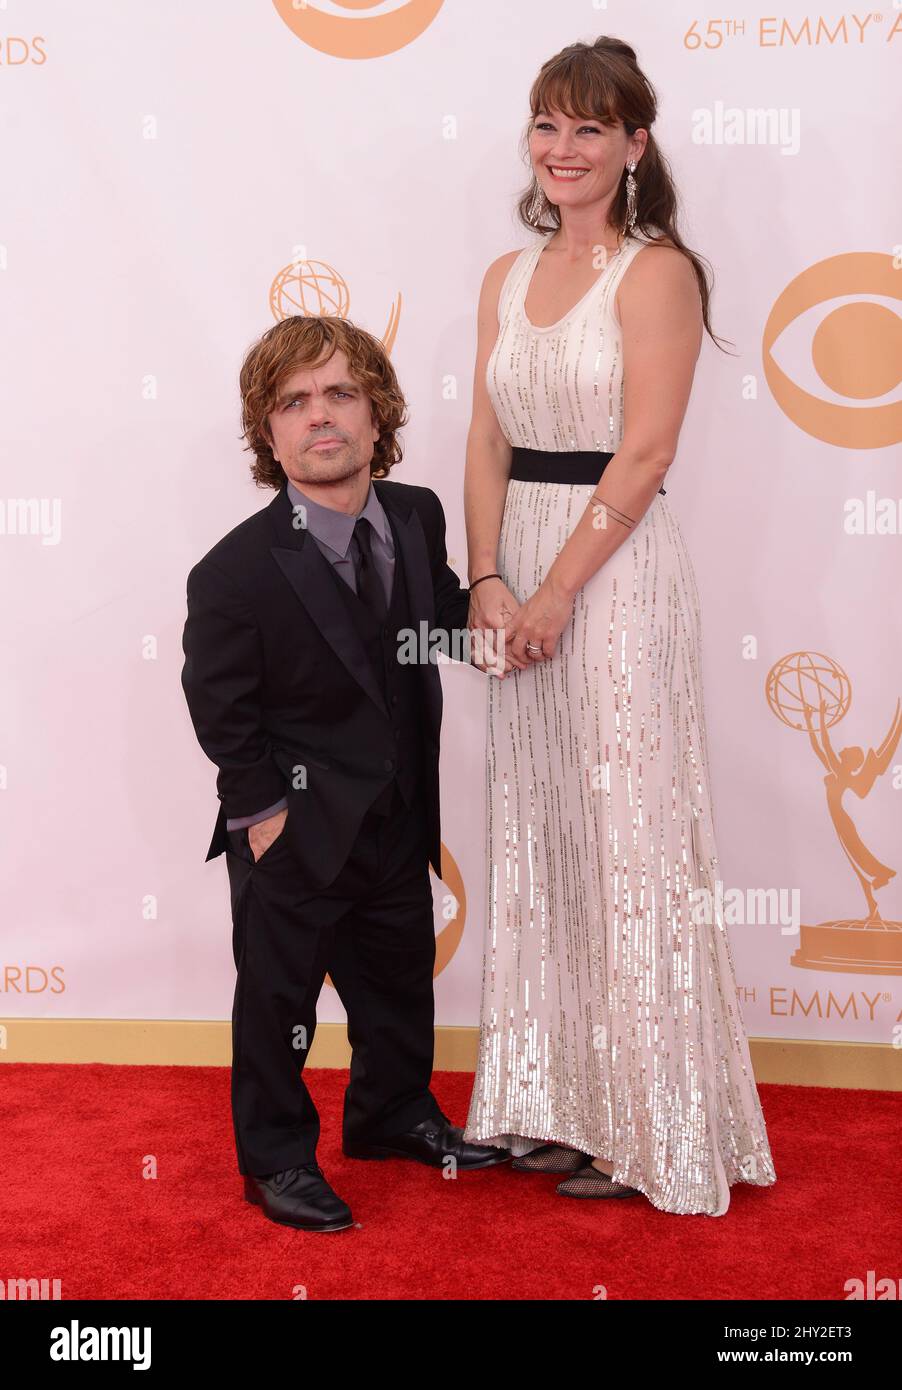 Peter Dinklage and Erica Schmidt attends the 65th Annual Primetime Emmy Awards held at the Nokia Theatre at L.A. Live, September 22, 2013 in Los Angeles. Stock Photo